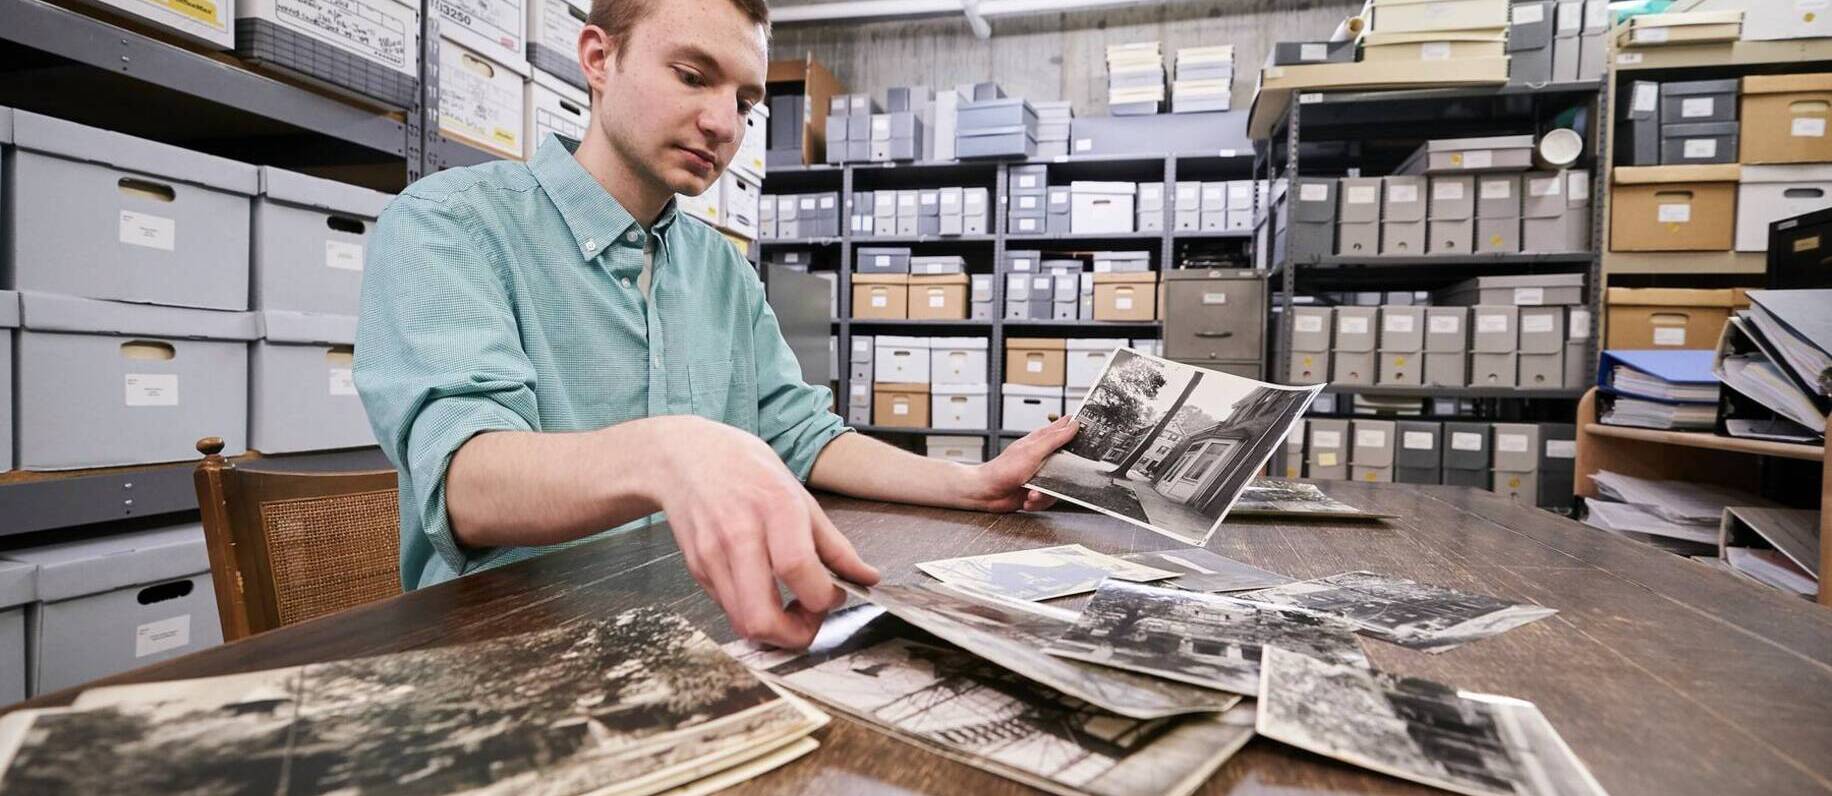 A student looks at archival photos at Ursuline College